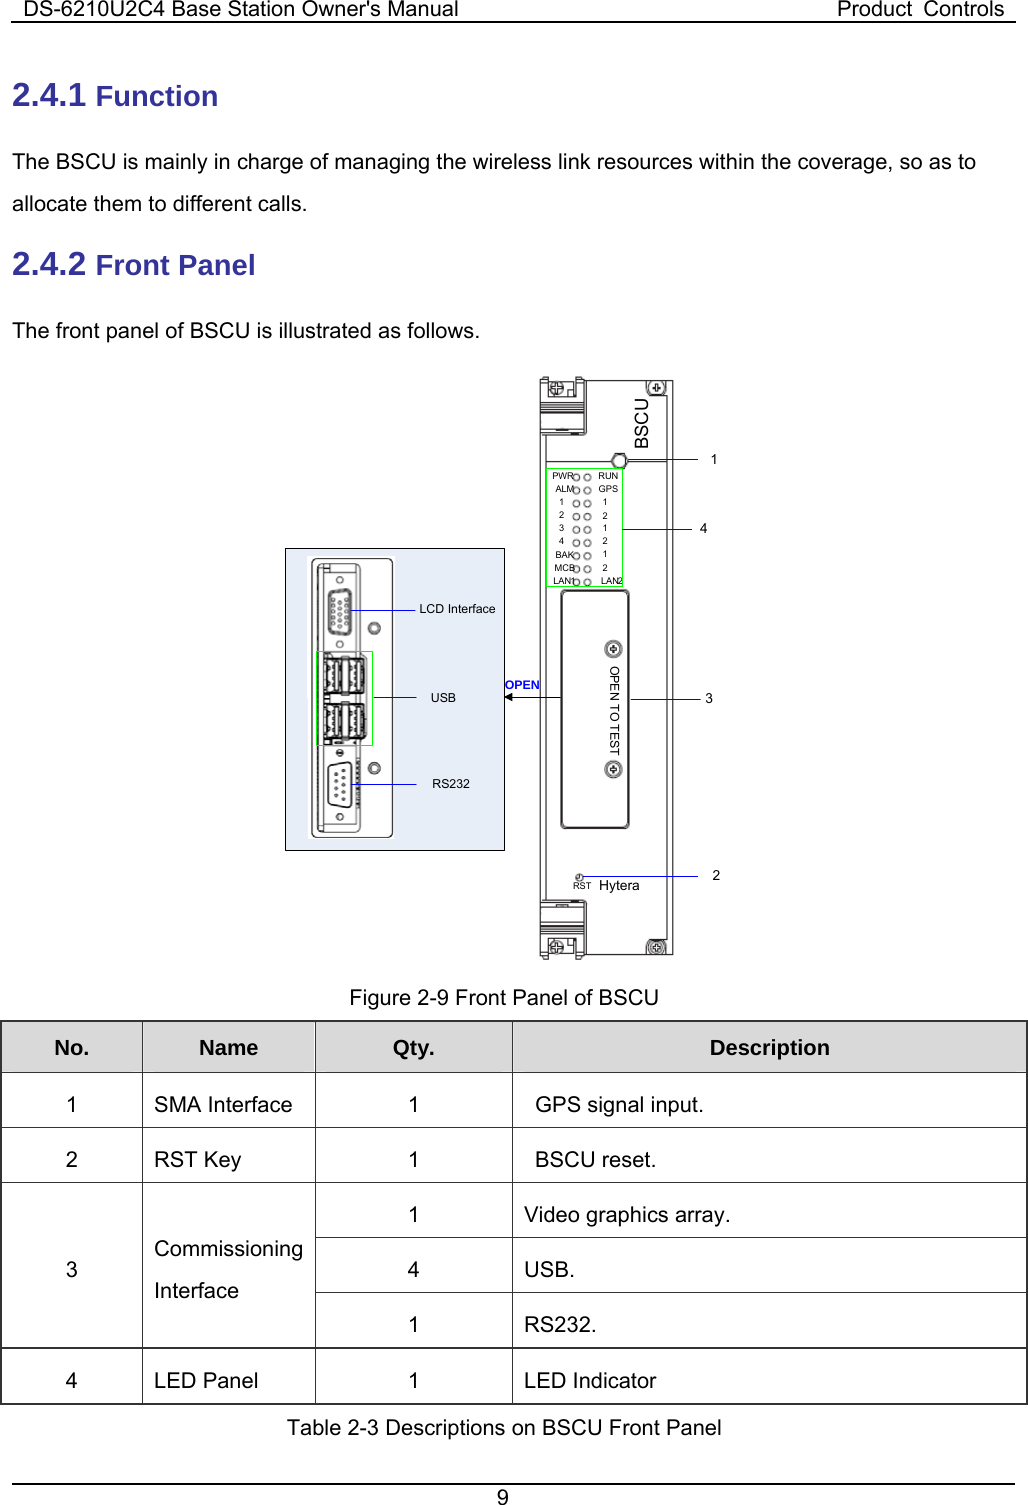 DS-6210U2C4 Base Station Owner&apos;s Manual  Product  Controls 9  2.4.1 Function The BSCU is mainly in charge of managing the wireless link resources within the coverage, so as to allocate them to different calls.   2.4.2 Front Panel   The front panel of BSCU is illustrated as follows.   BSCUPWRALMRUNGPS1234121212BAKMCBLAN1 LAN2OPEN TO TESTHyteraRST4312USBLCD InterfaceRS232OPEN Figure 2-9 Front Panel of BSCU No.  Name   Qty.  Description 1  SMA Interface   1   GPS signal input.  2  RST Key  1    BSCU reset.   1  Video graphics array.   4 USB.  3 Commissioning Interface 1 RS232.  4  LED Panel    1  LED Indicator   Table 2-3 Descriptions on BSCU Front Panel 